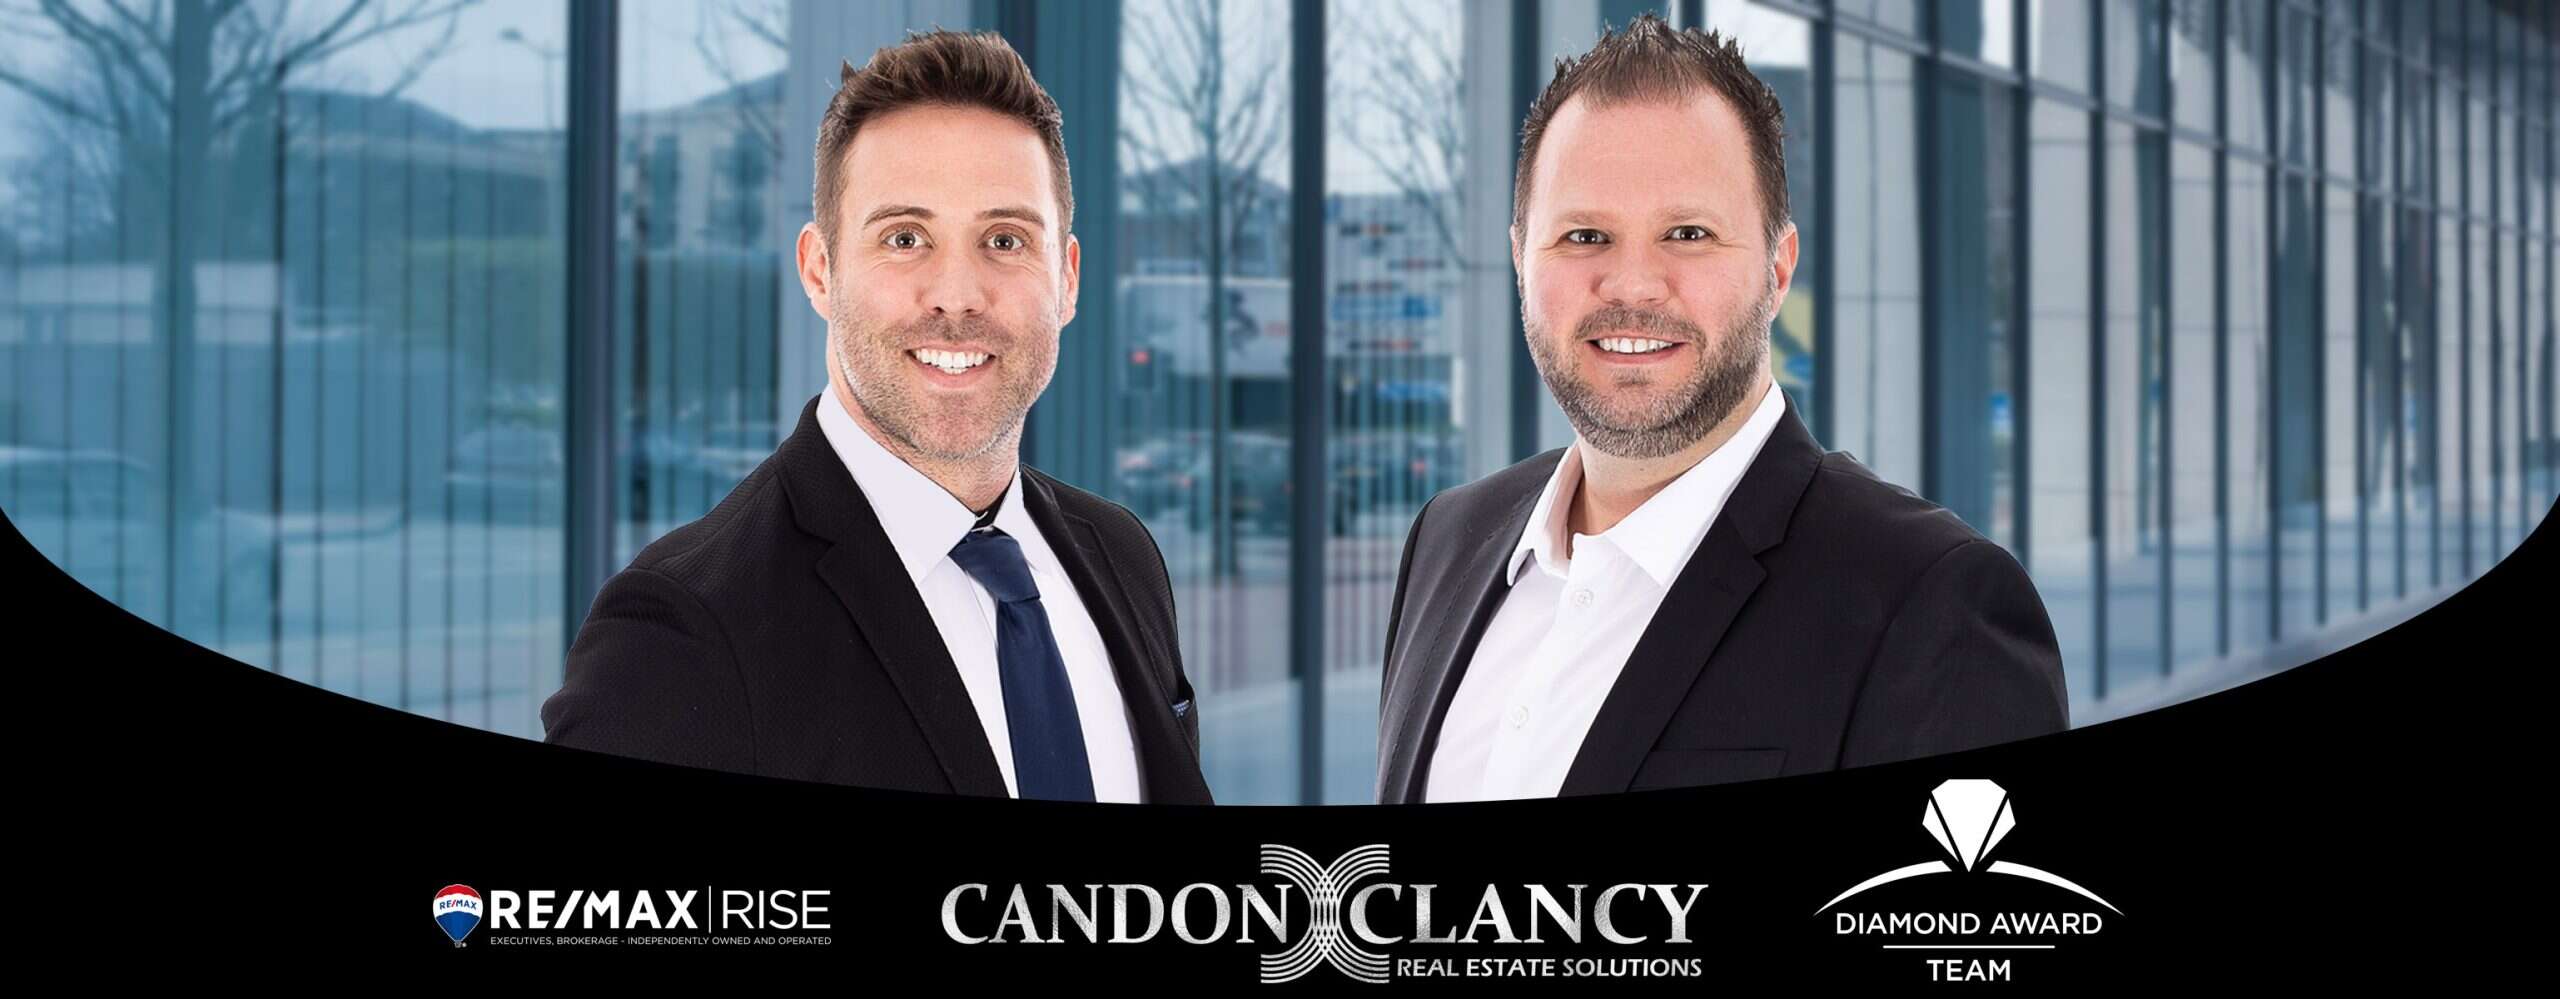 Candon & Clancy